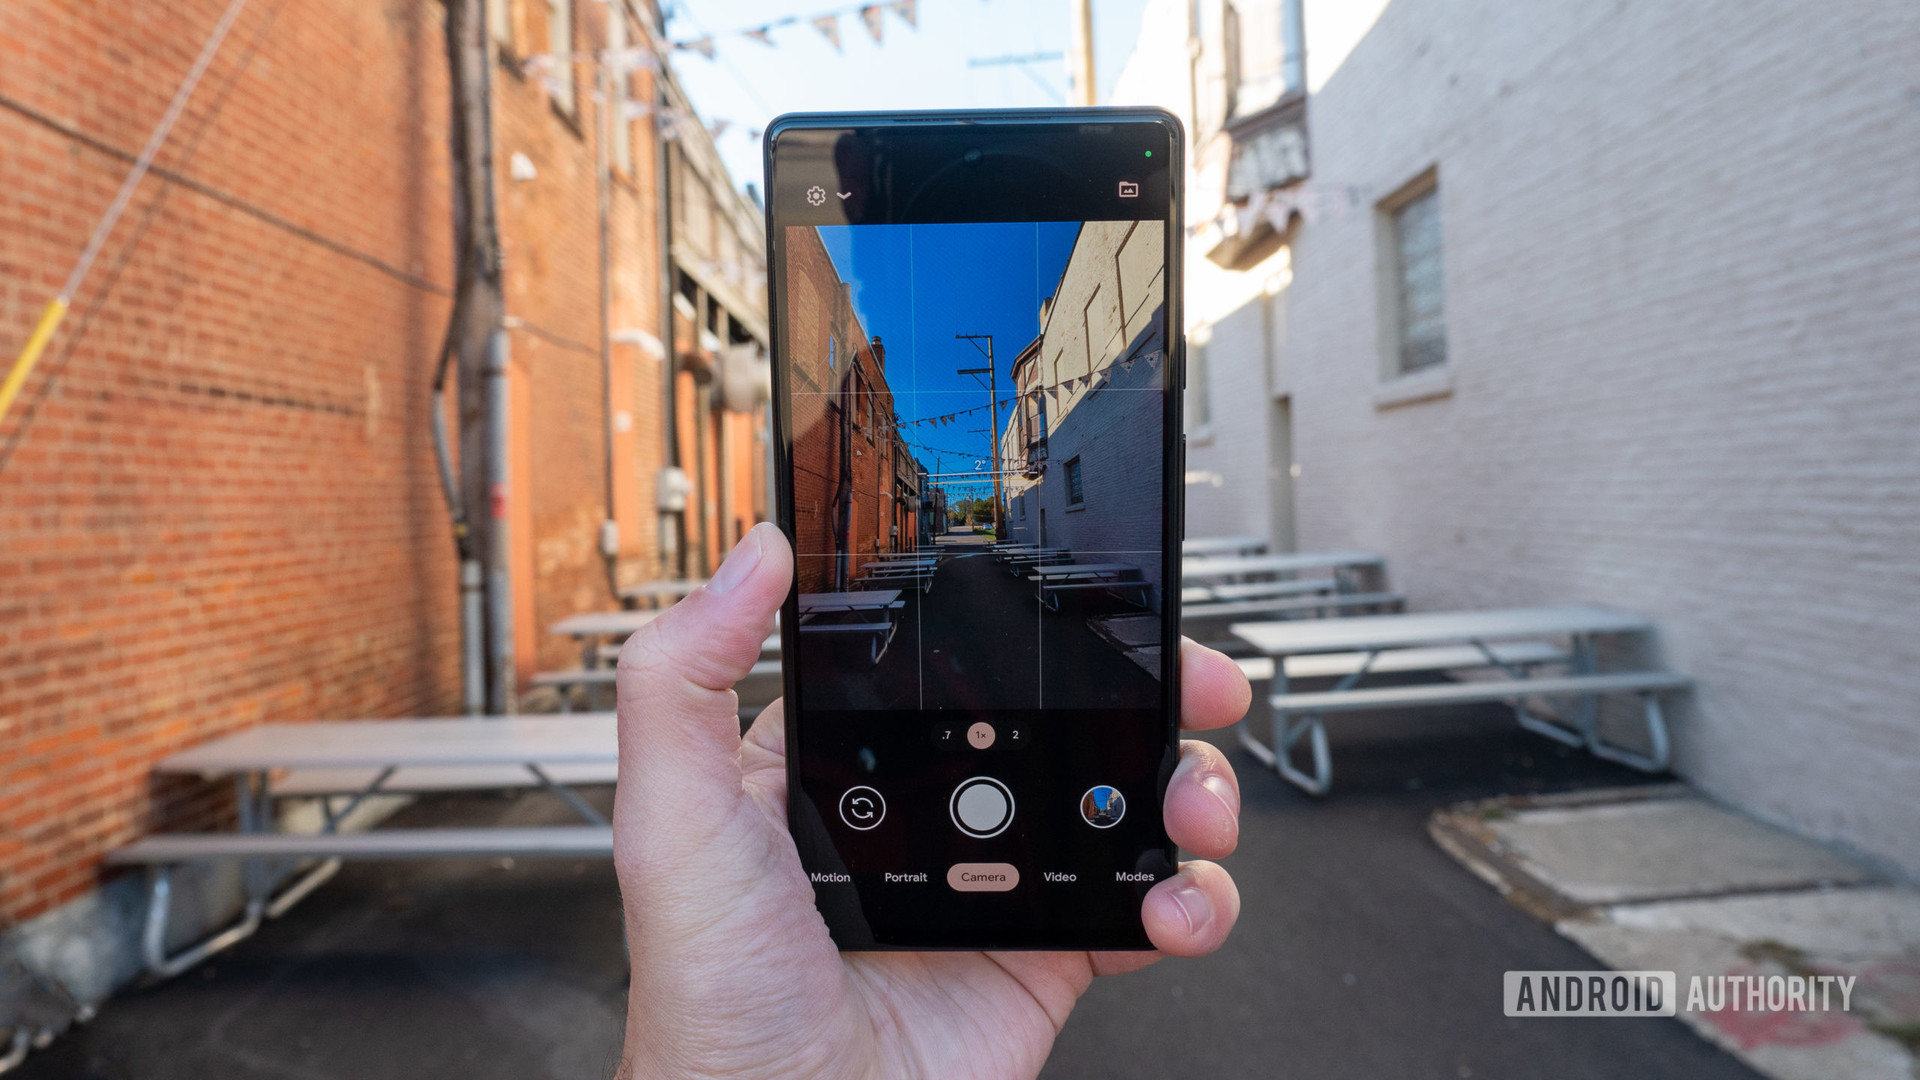 Google Pixel 6 in hand in an alley showing the camera app